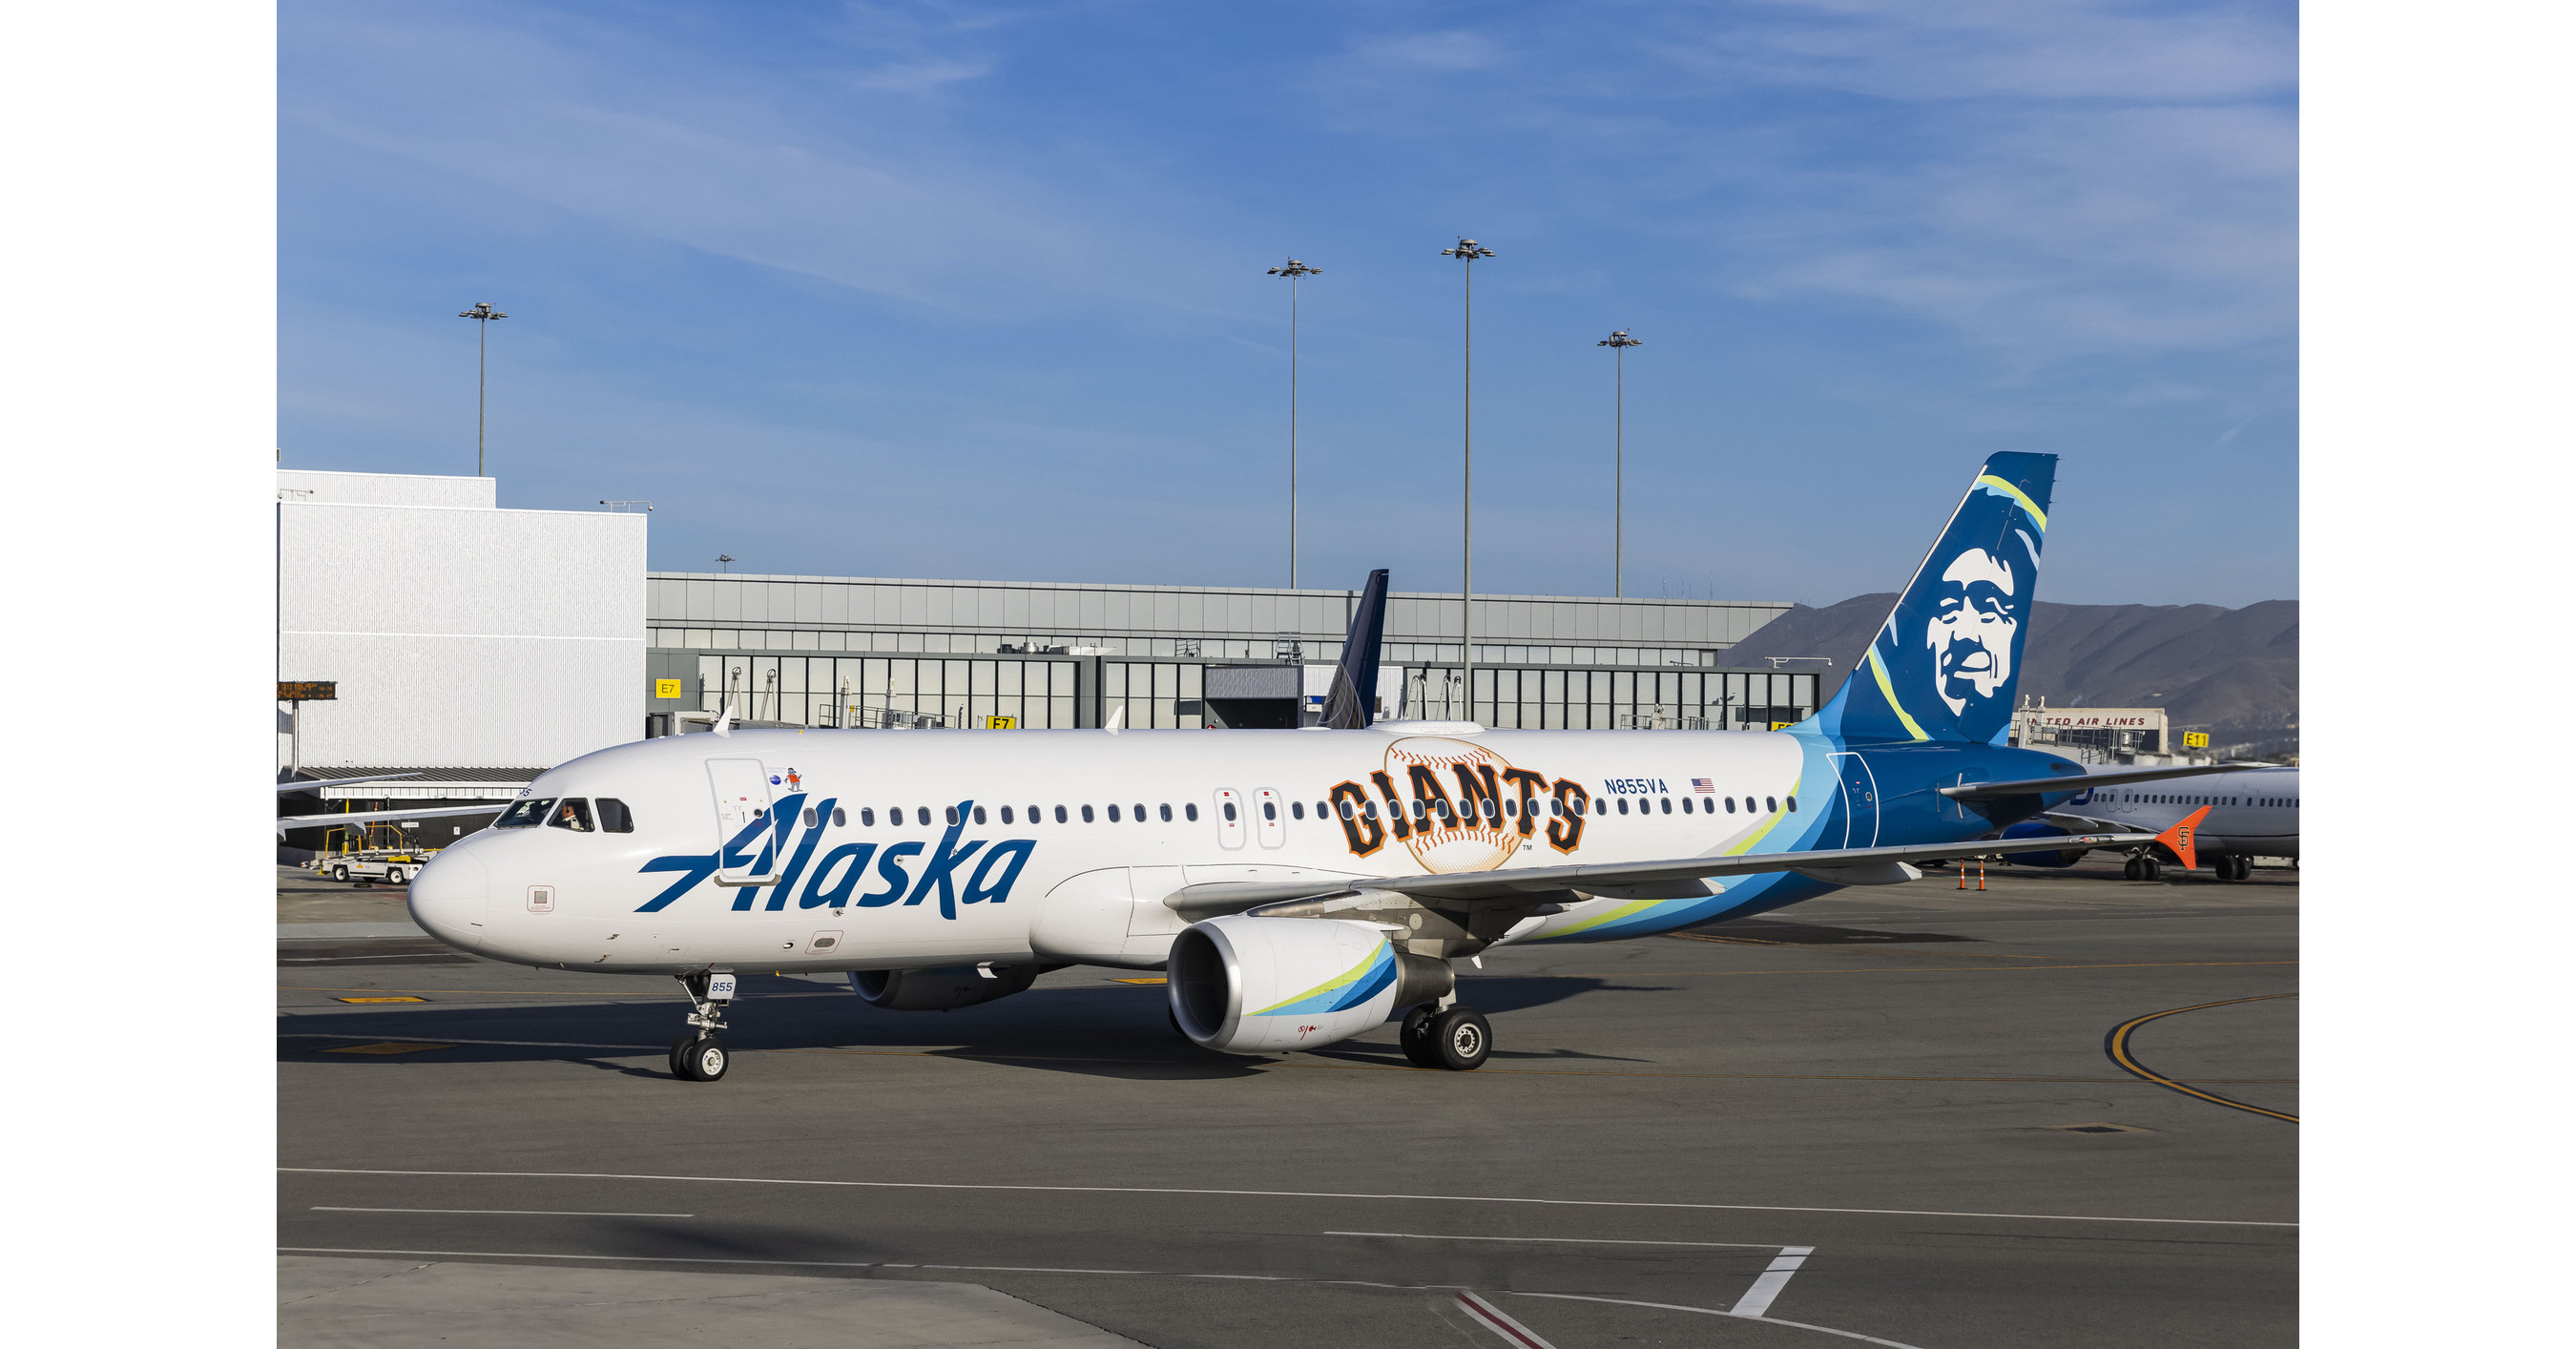 San Francisco Giants and Alaska Airlines' newest livery shows up in a